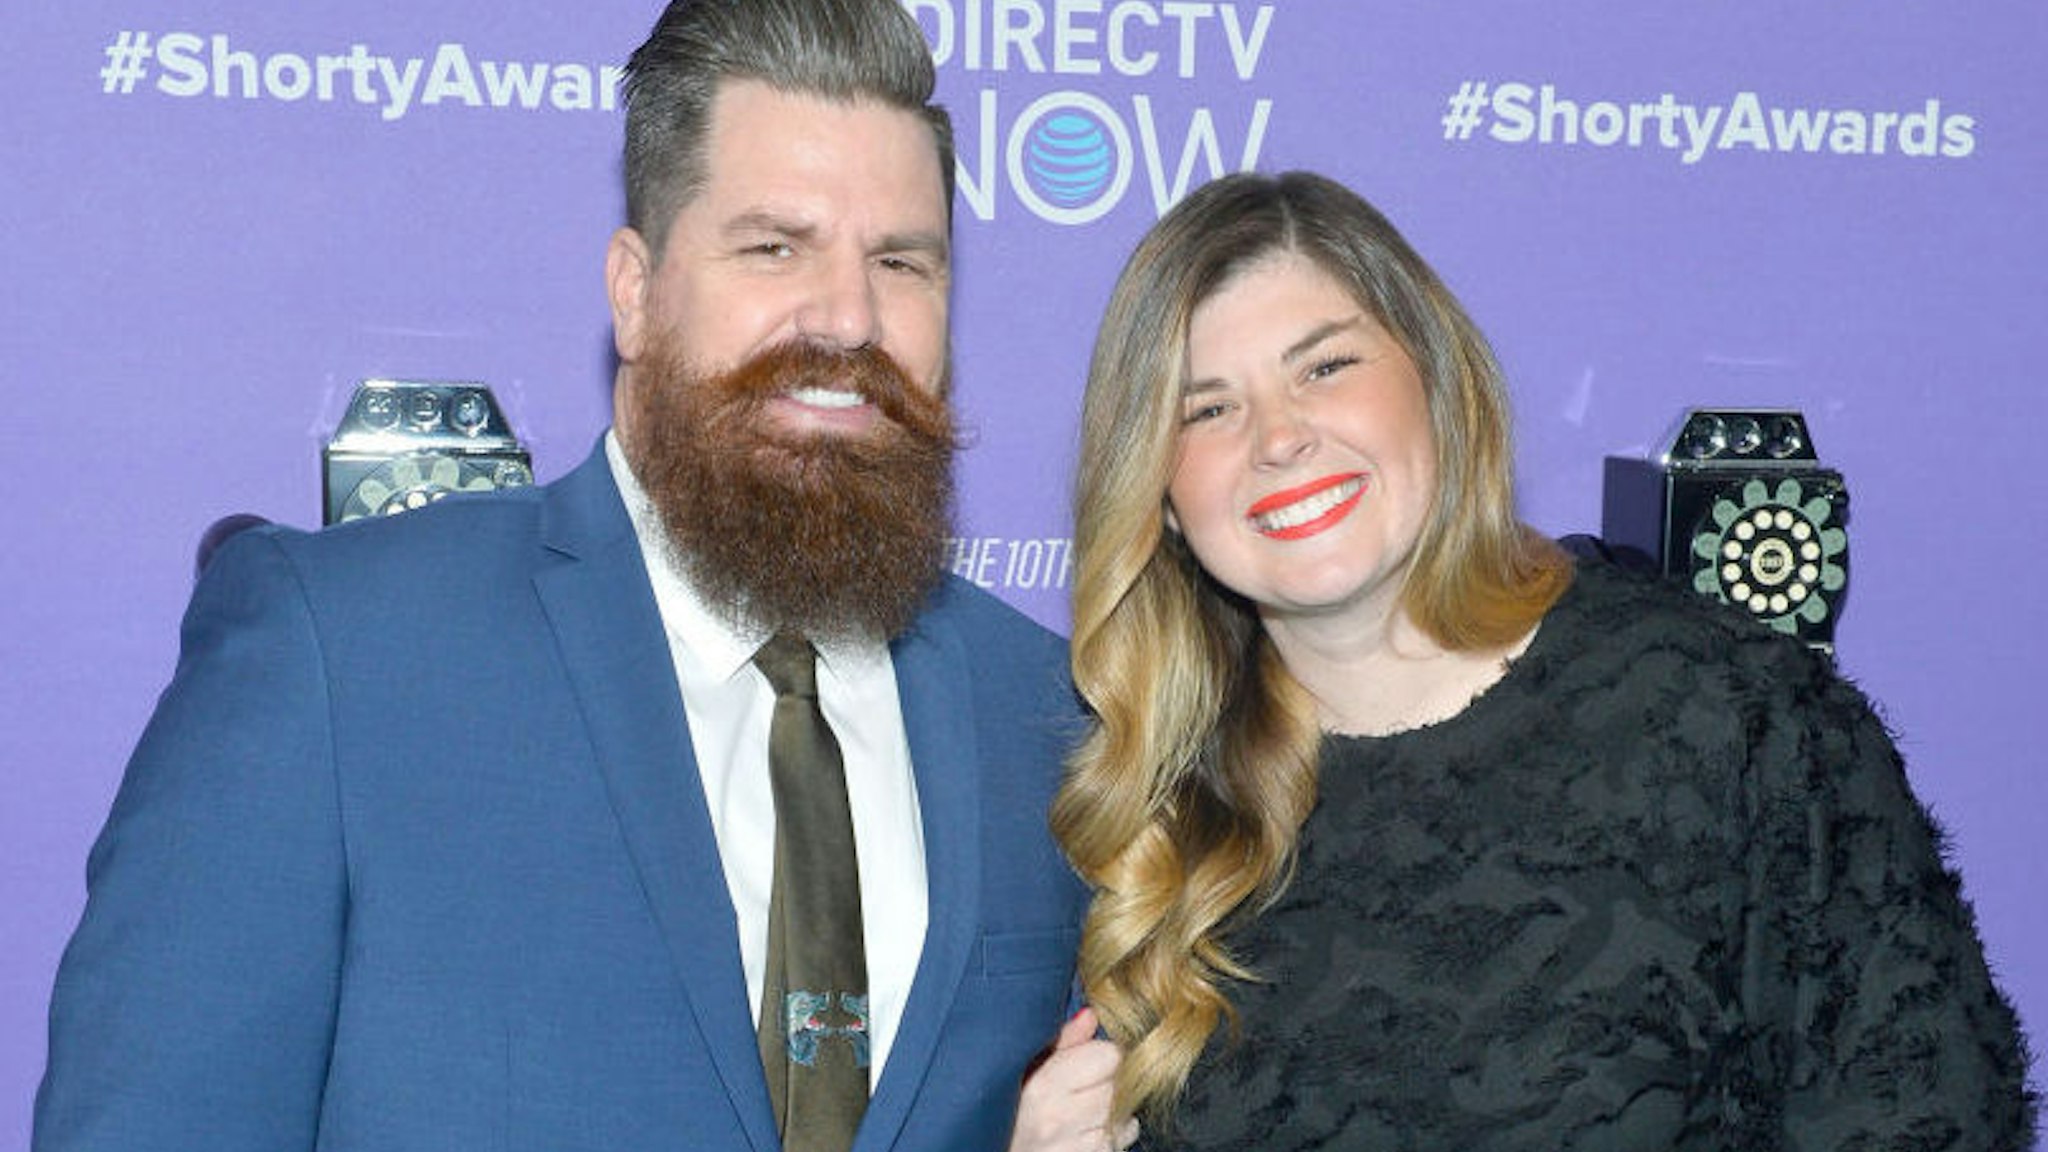 Andy Meredith (L) and Candis Meredith attend the 10th Annual Shorty Awards at PlayStation Theater on April 15, 2018 in New York City.